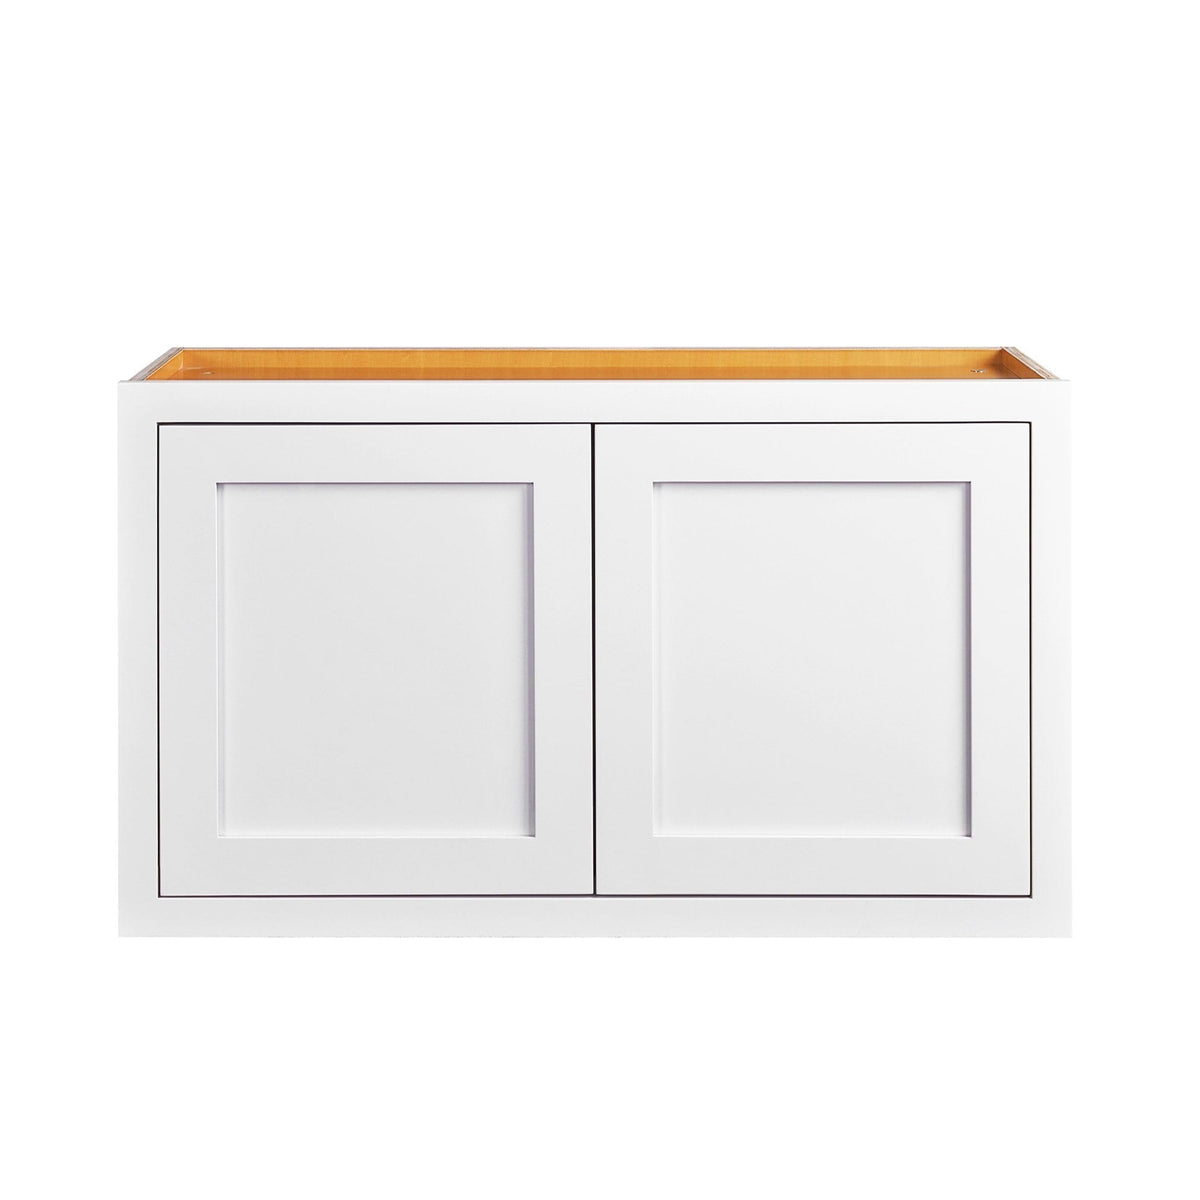 30" Wide Bridge Snow White Inset Shaker Wall Cabinet - Double Door 12", 15", 18", 21"& 24" Tall